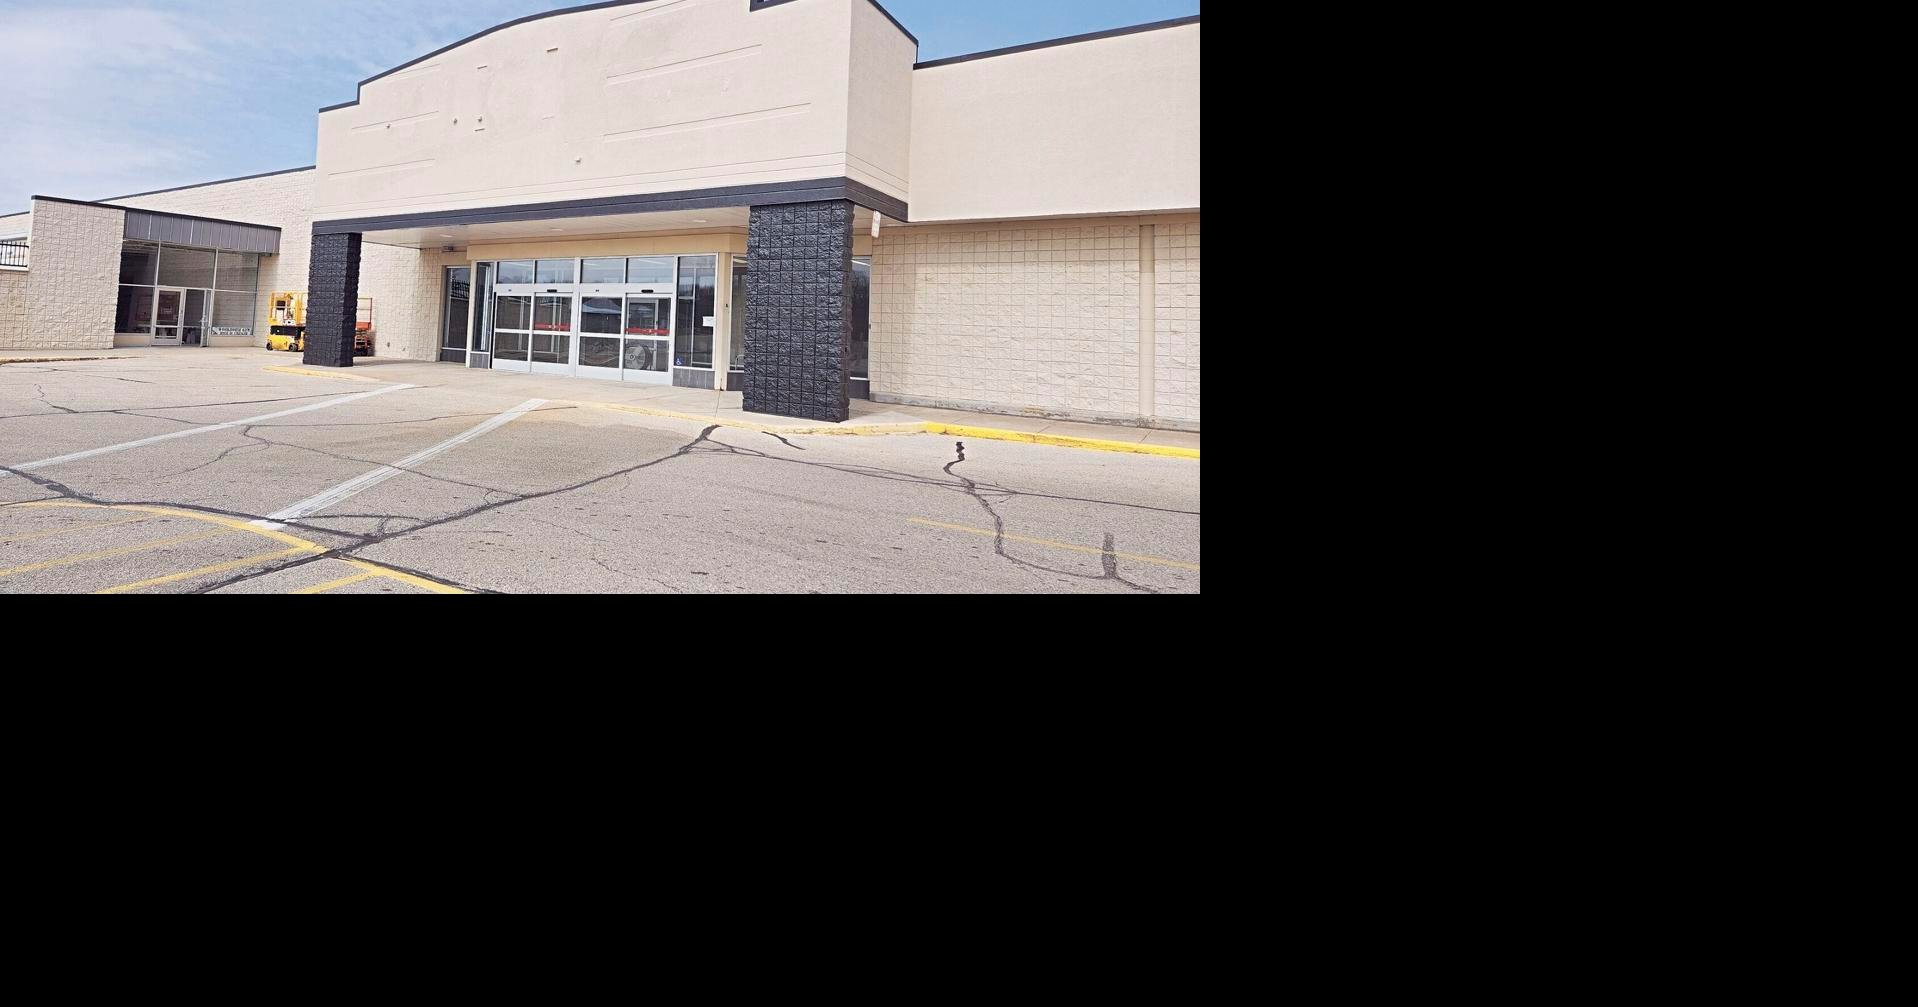 Old Kmart building will feature stores, axe throwing, strength